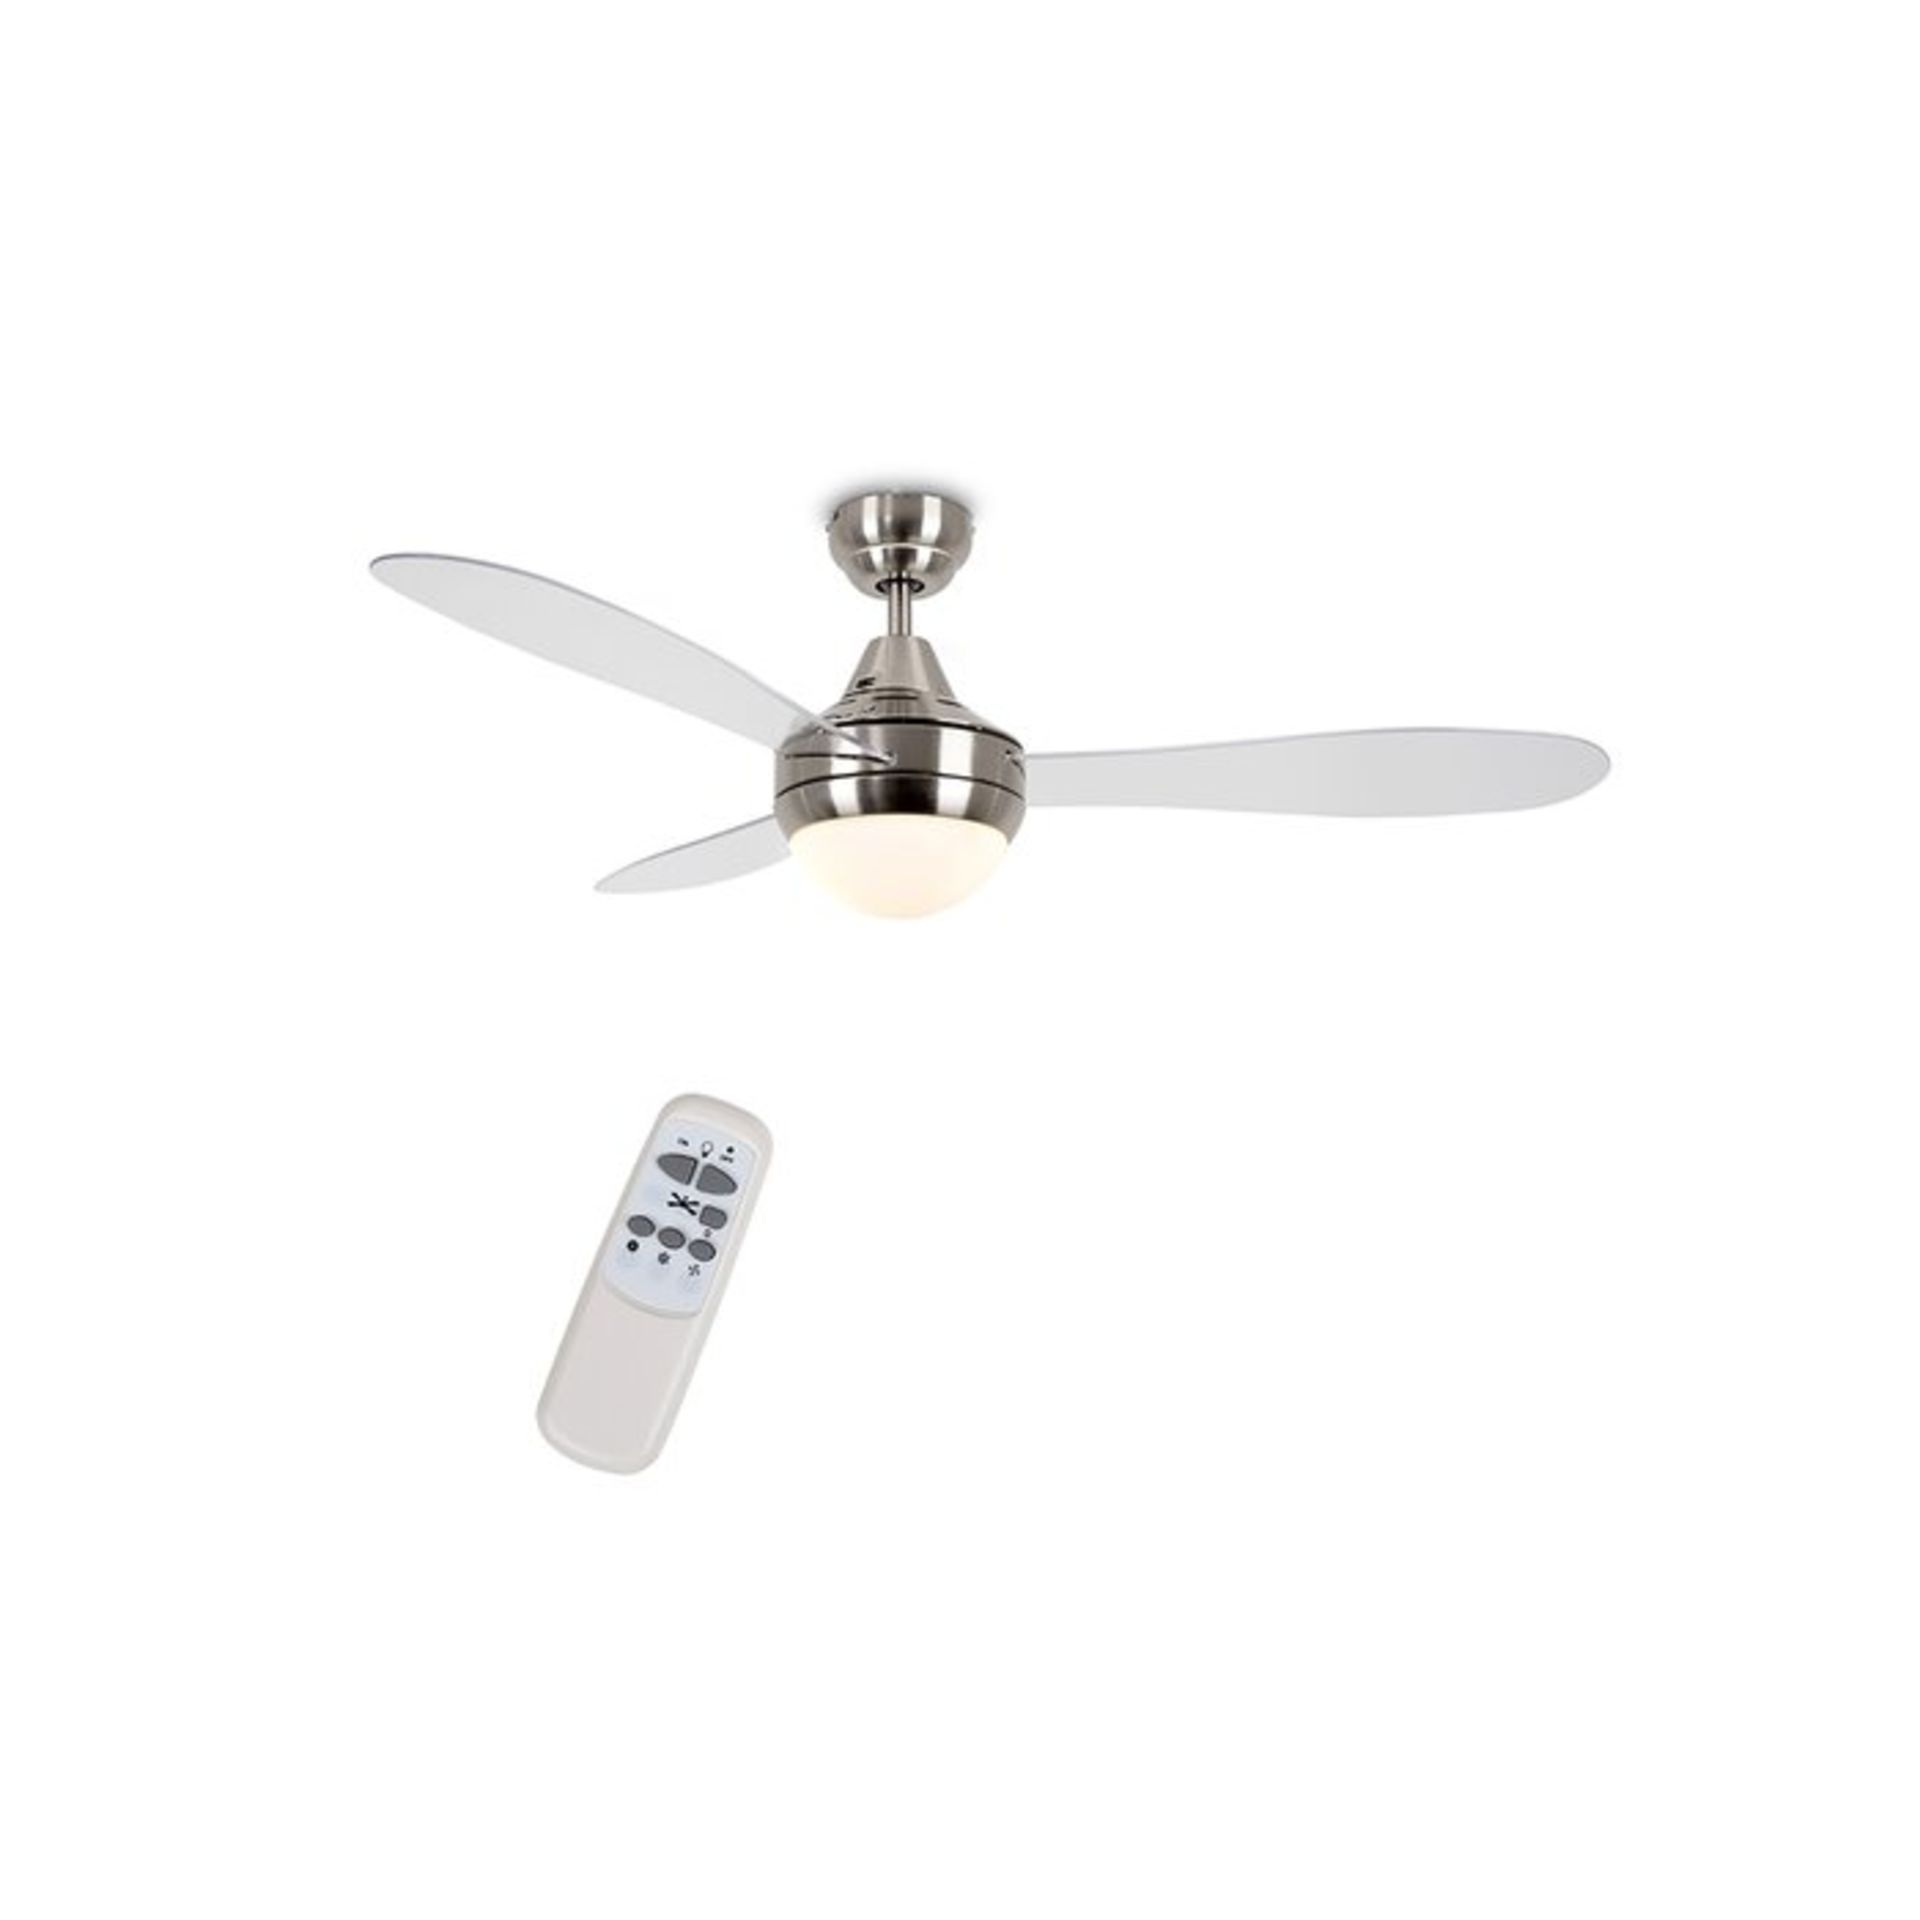 122cm Alverson 3 Blade Ceiling Fan with Remote Control - RRP £239.99 - Image 2 of 2